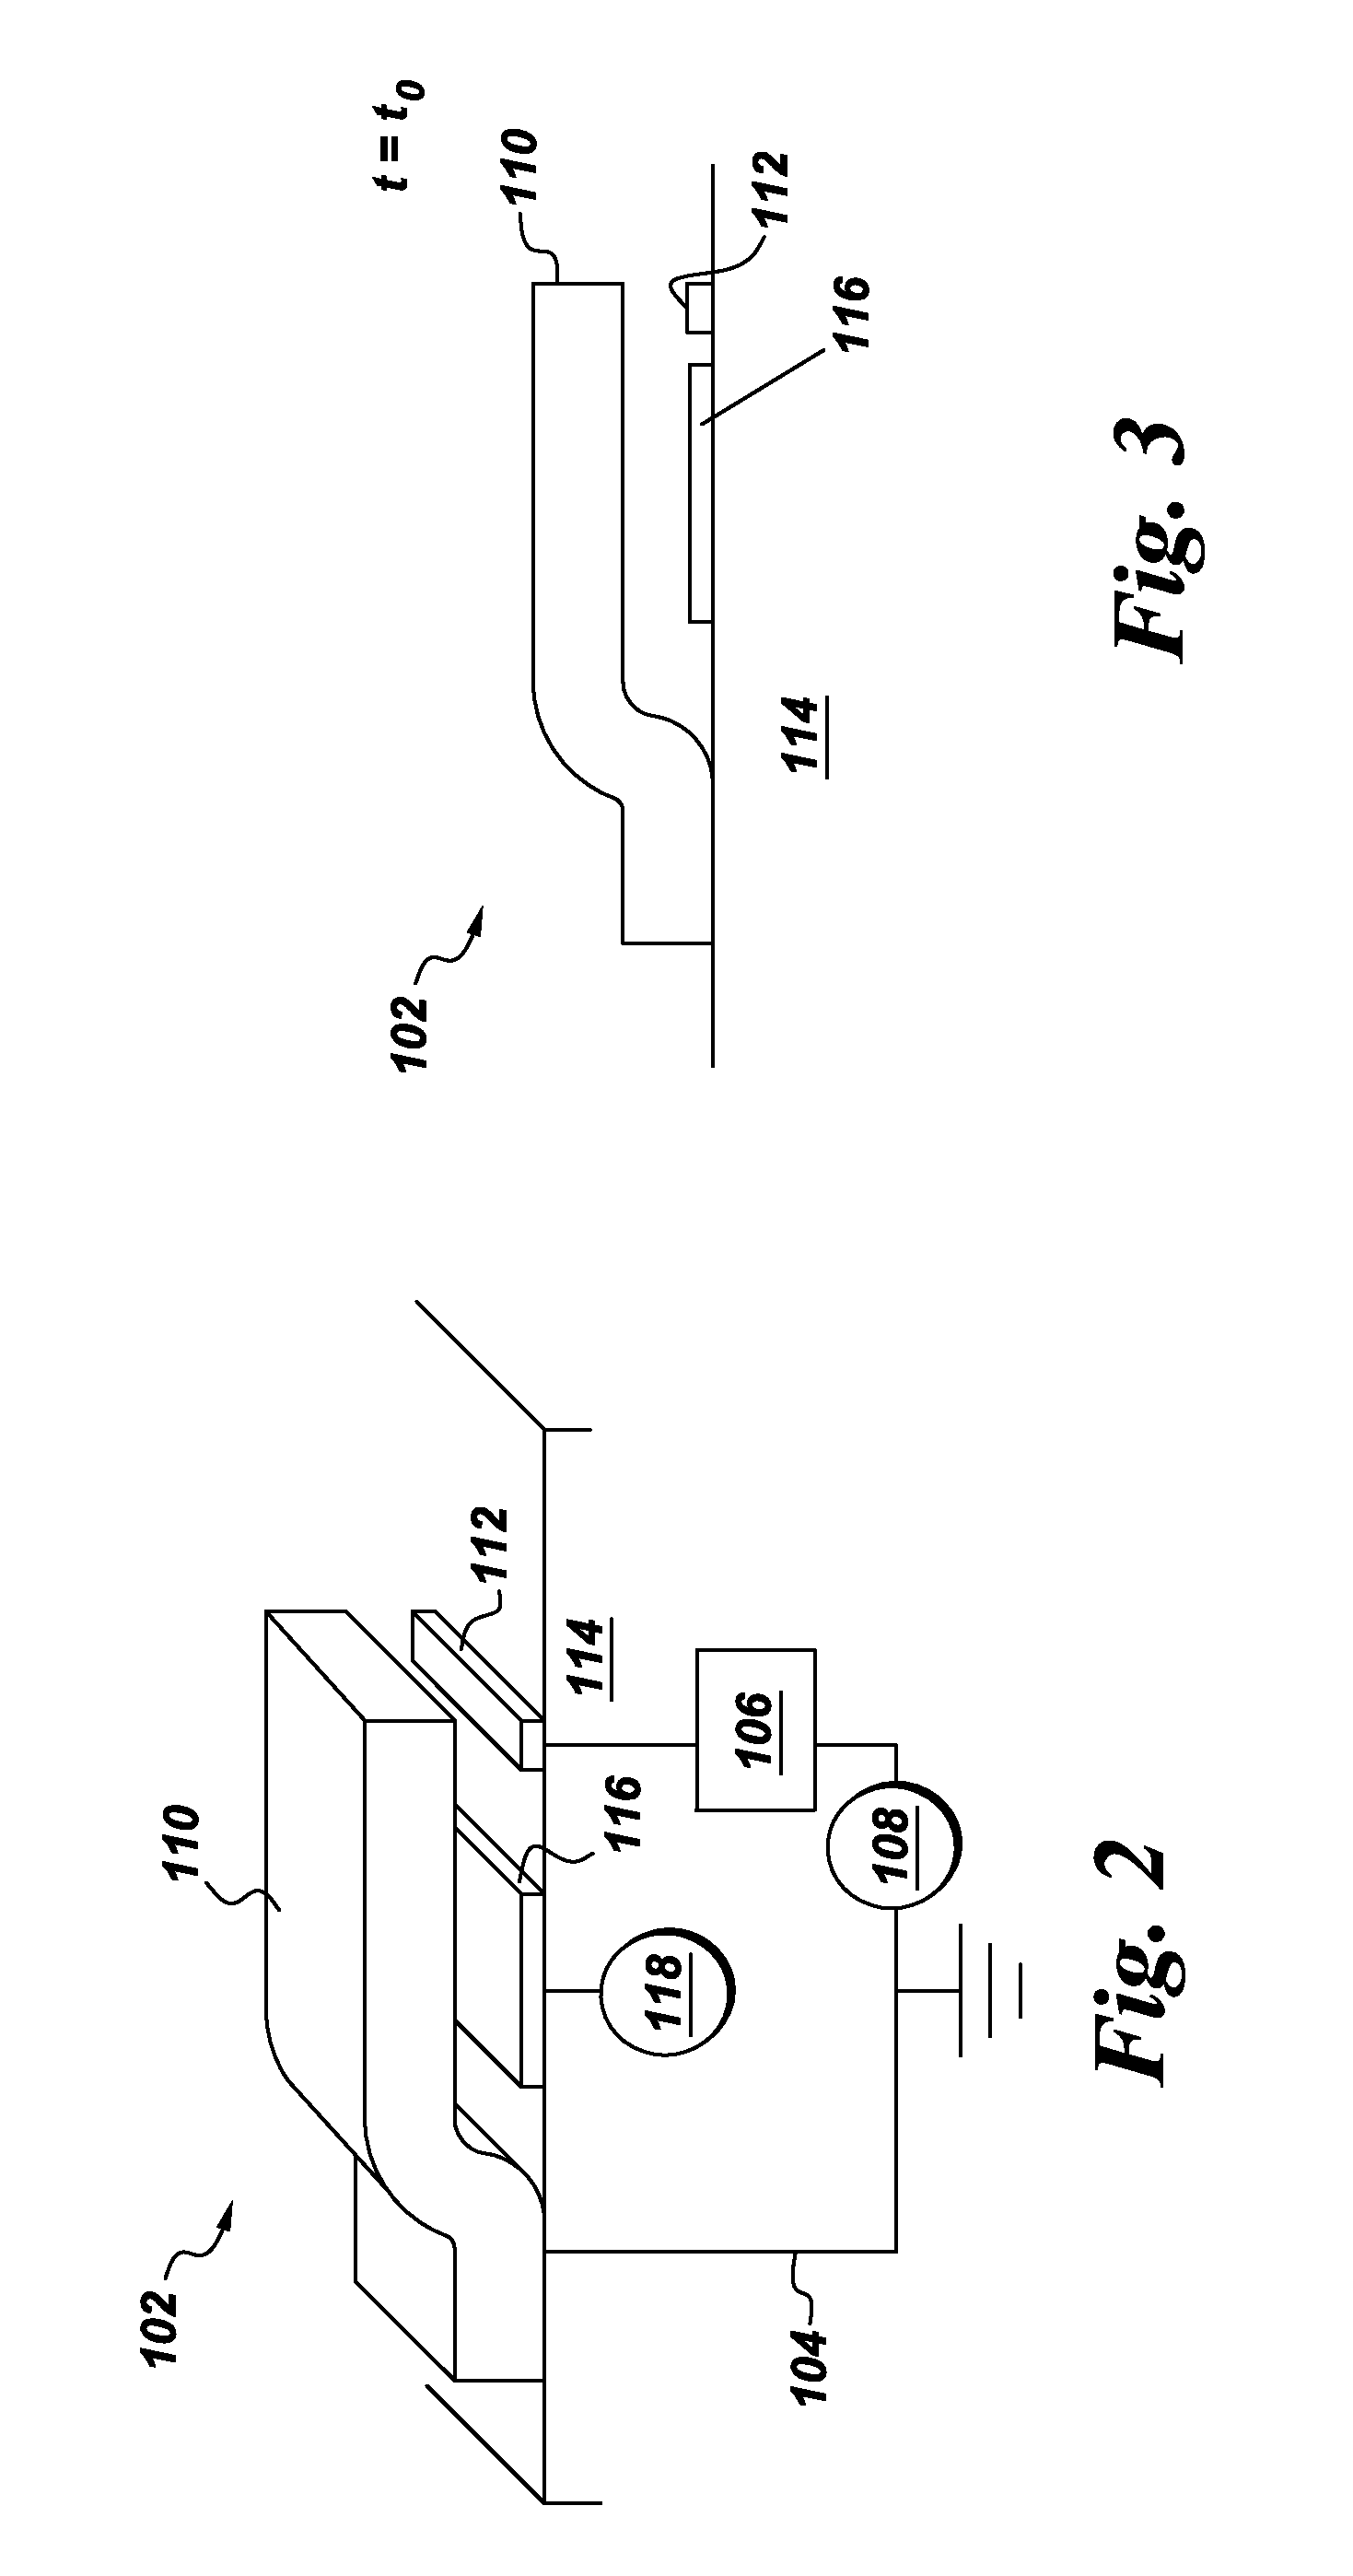 Switch structure and associated circuit